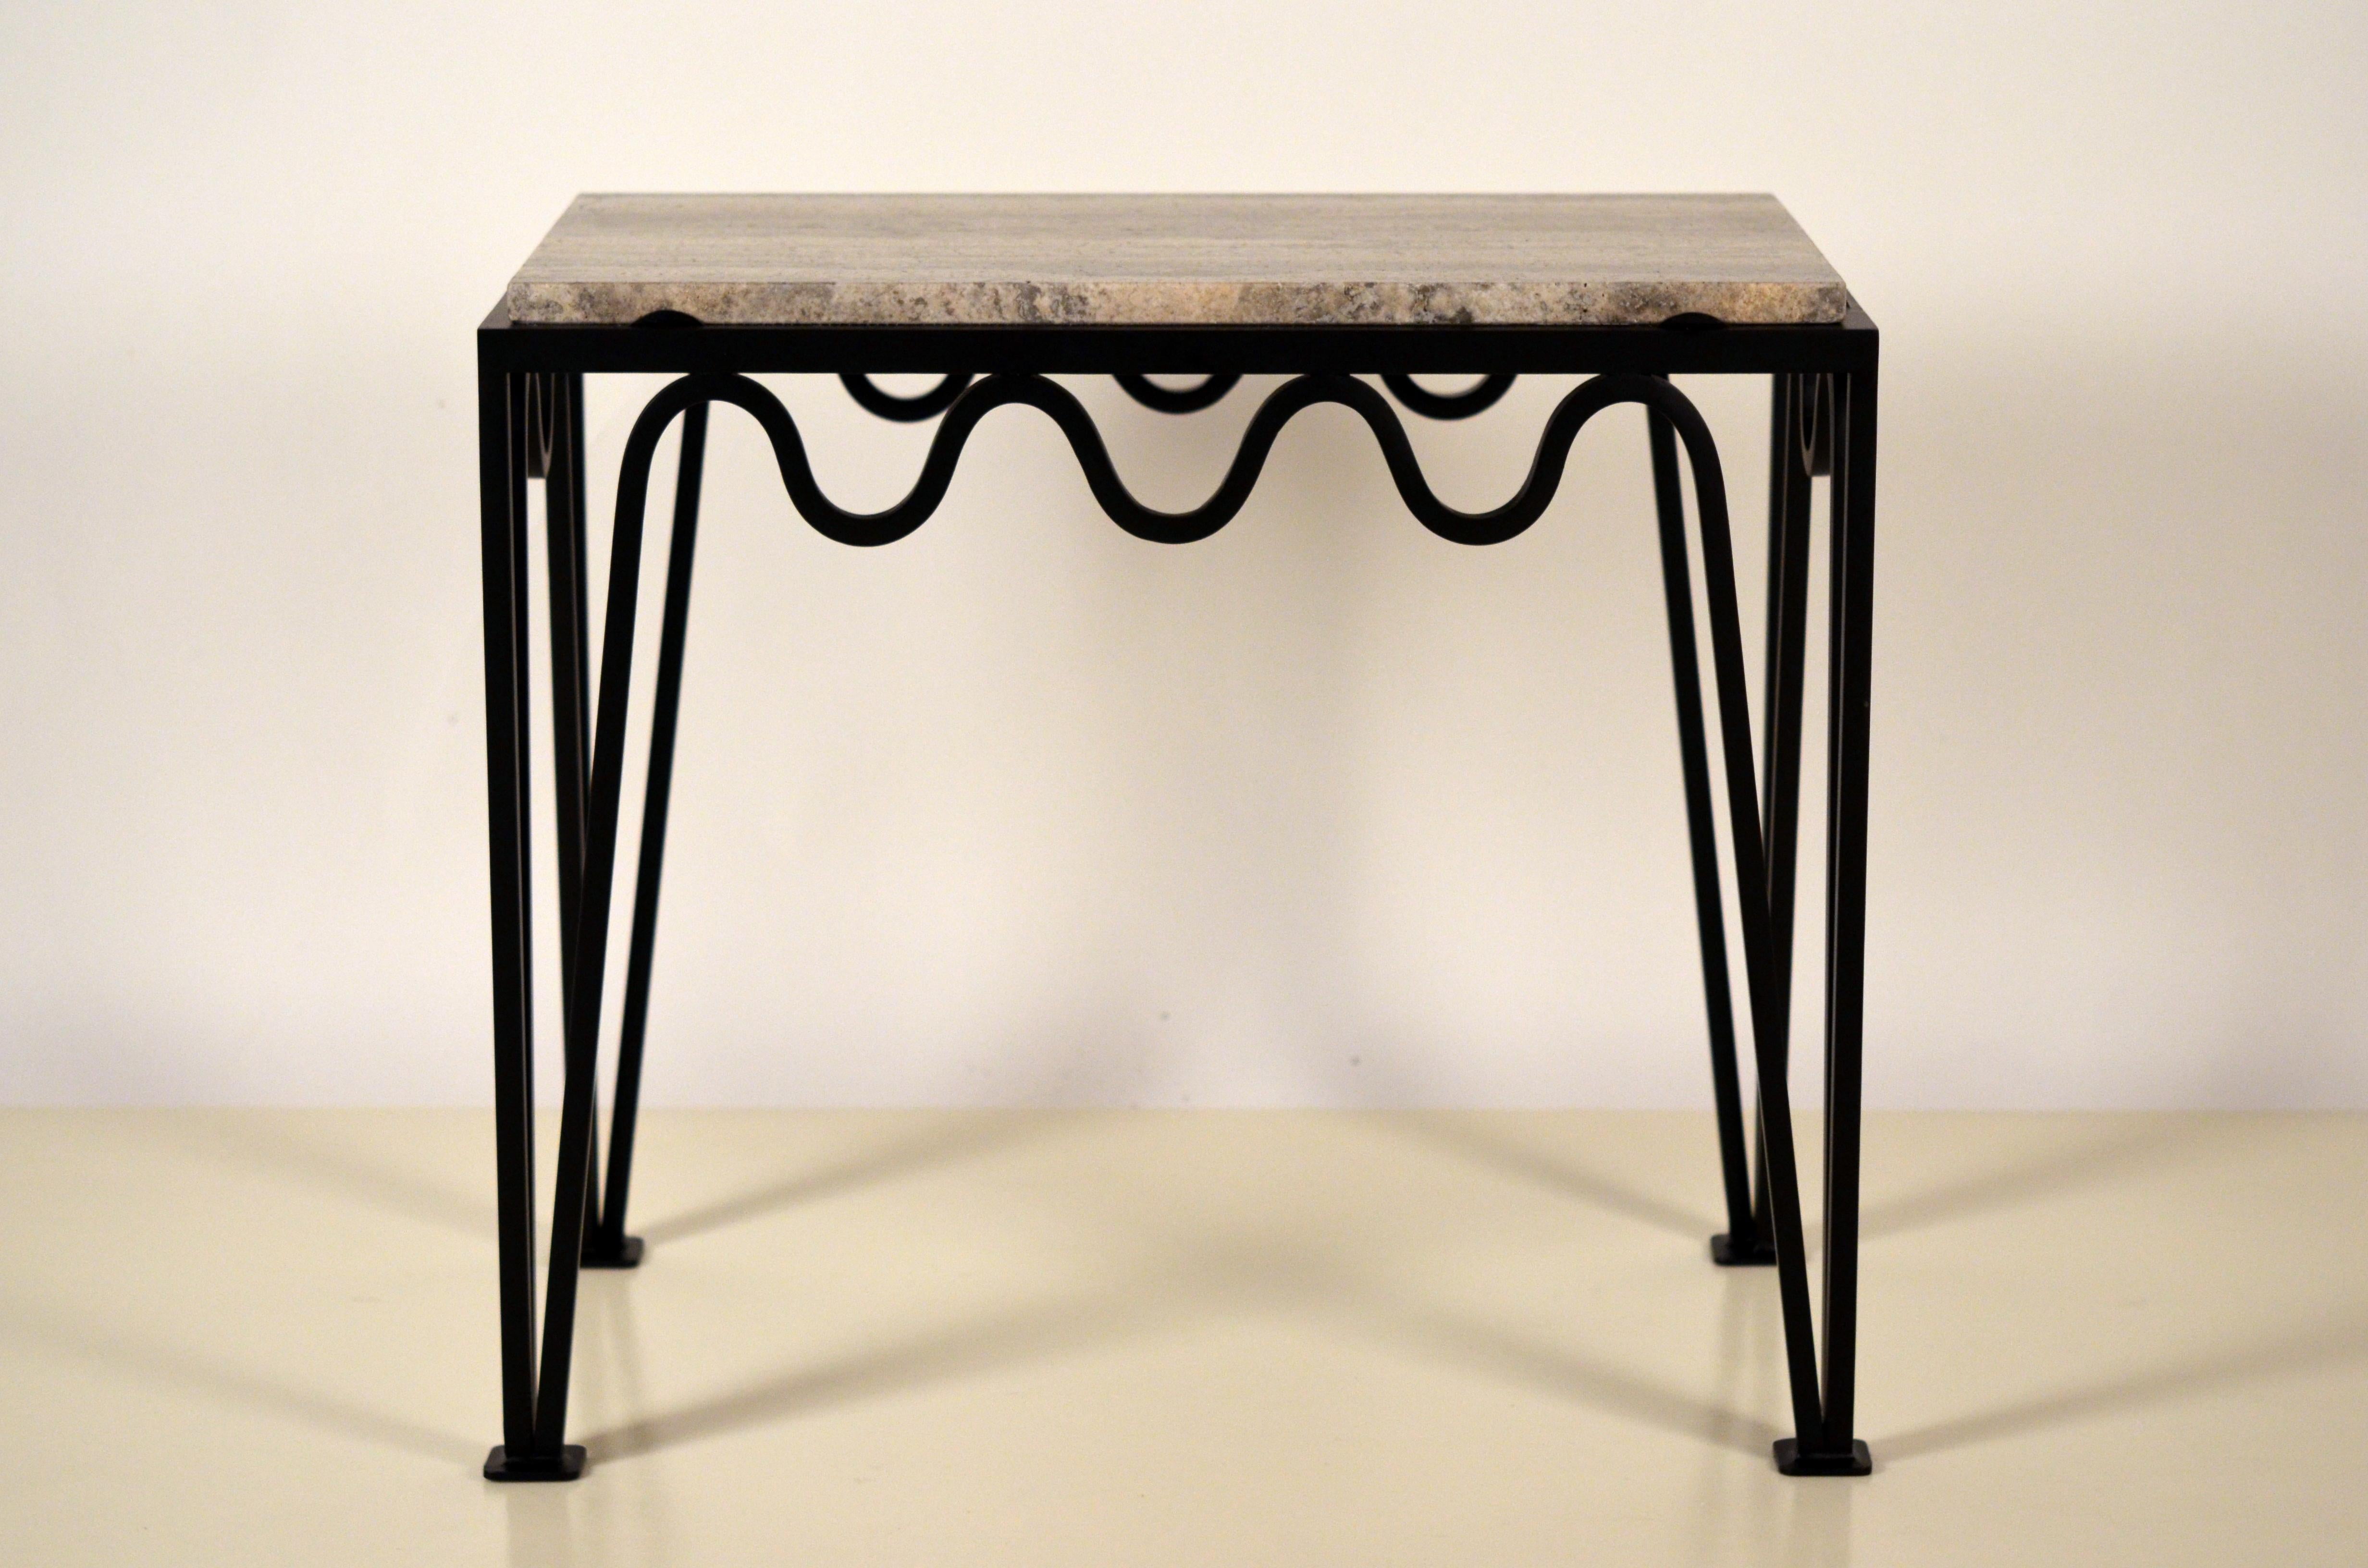 Pair of 'Méandre' Black Iron and Silver Travertine Side Tables by Design Frères For Sale 2